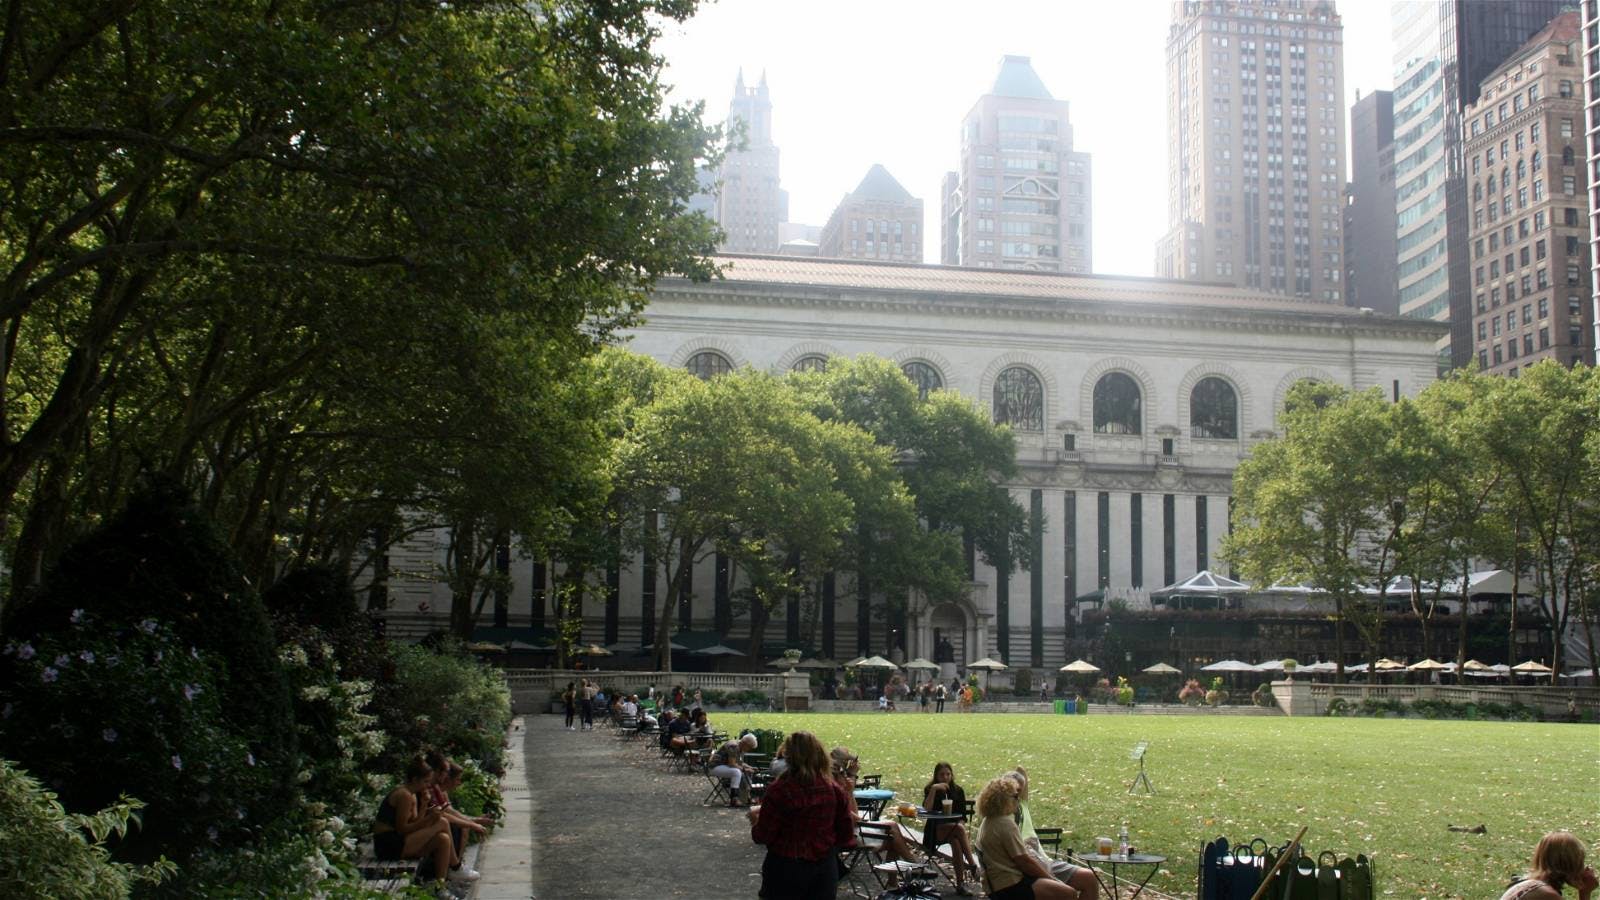 Treating urban green spaces as "green premiums" is an affront: Here's why 